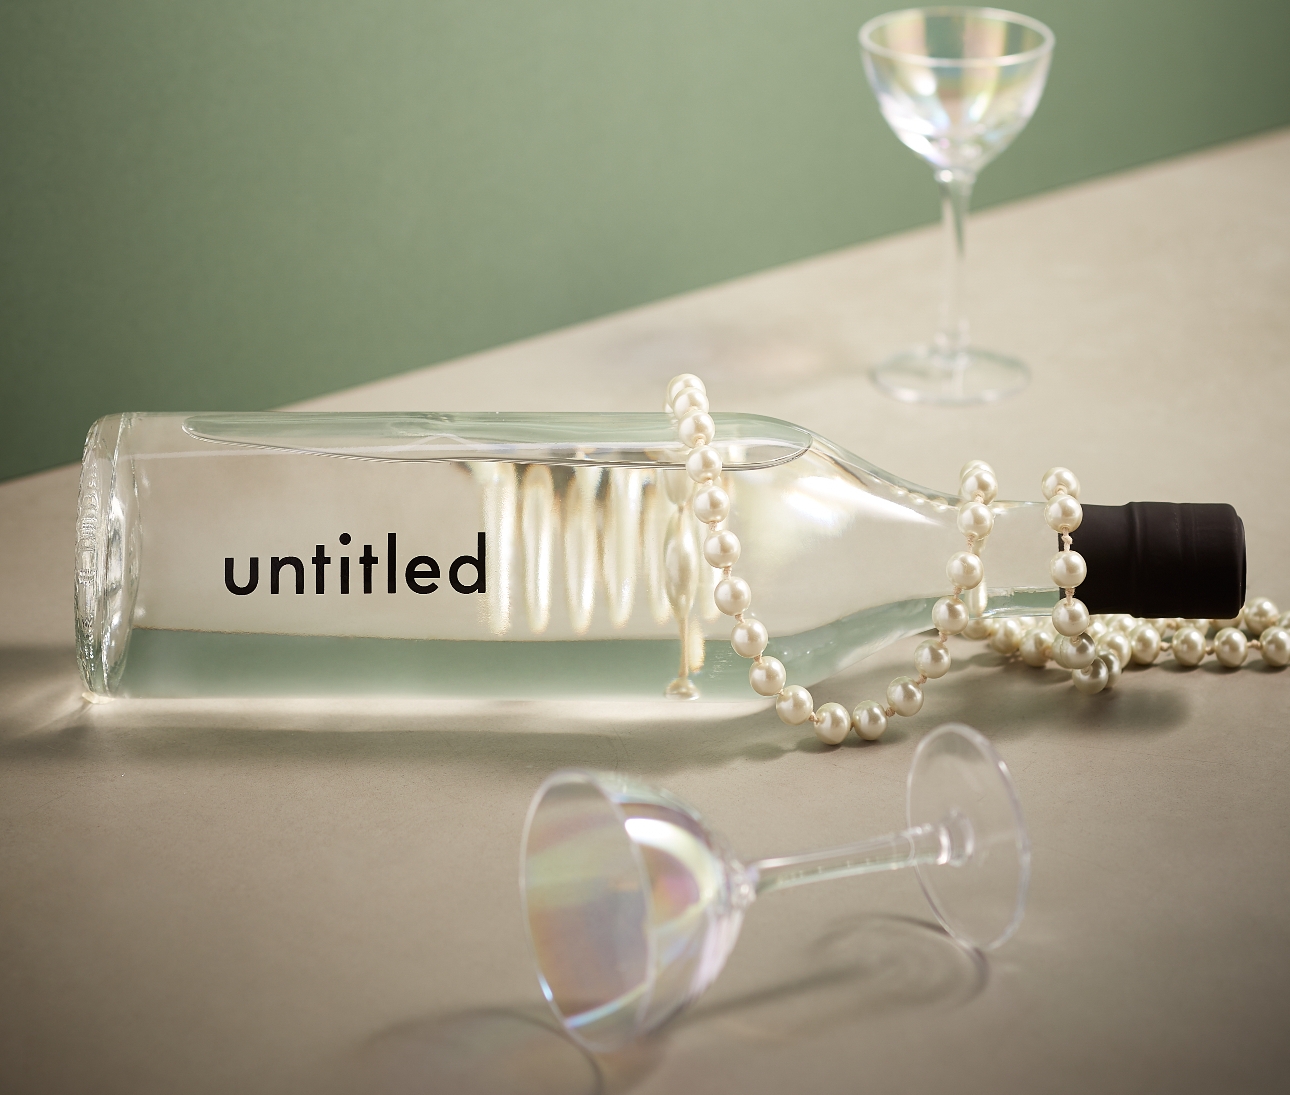 clear bottle of drink laying on it's side with two glasses next to it a a pearl necklace draped over it